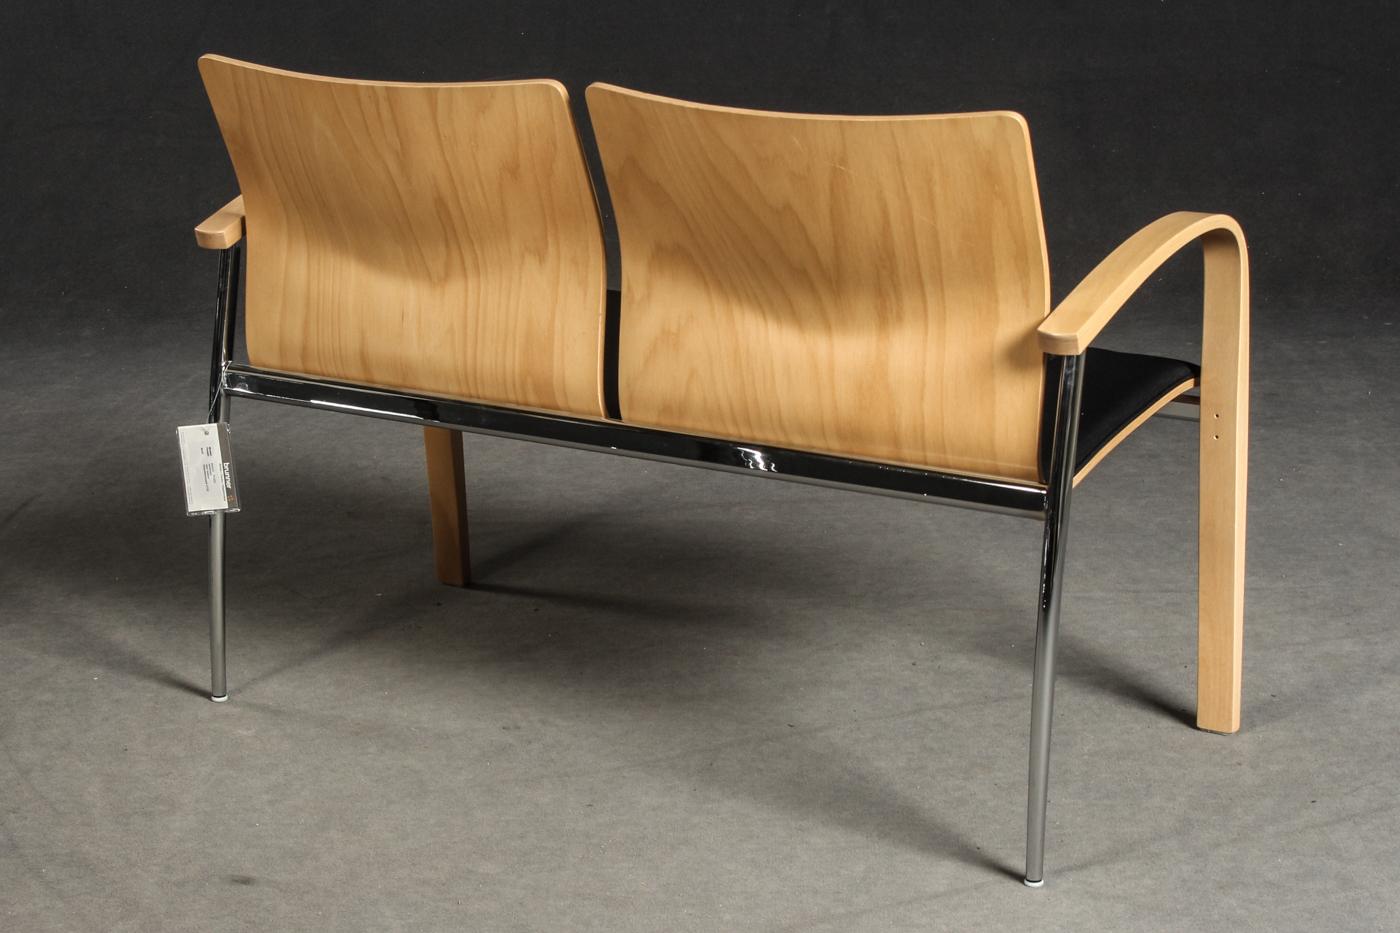 Two-seat bench by Brunner Zweisitzer. Frame steel and plywood. Seat shell molded beech plywood. Upholstered seat, fabric cover in black. Wooden parts natural lacquered. Wooden parts slightly bumped, slight scratching.